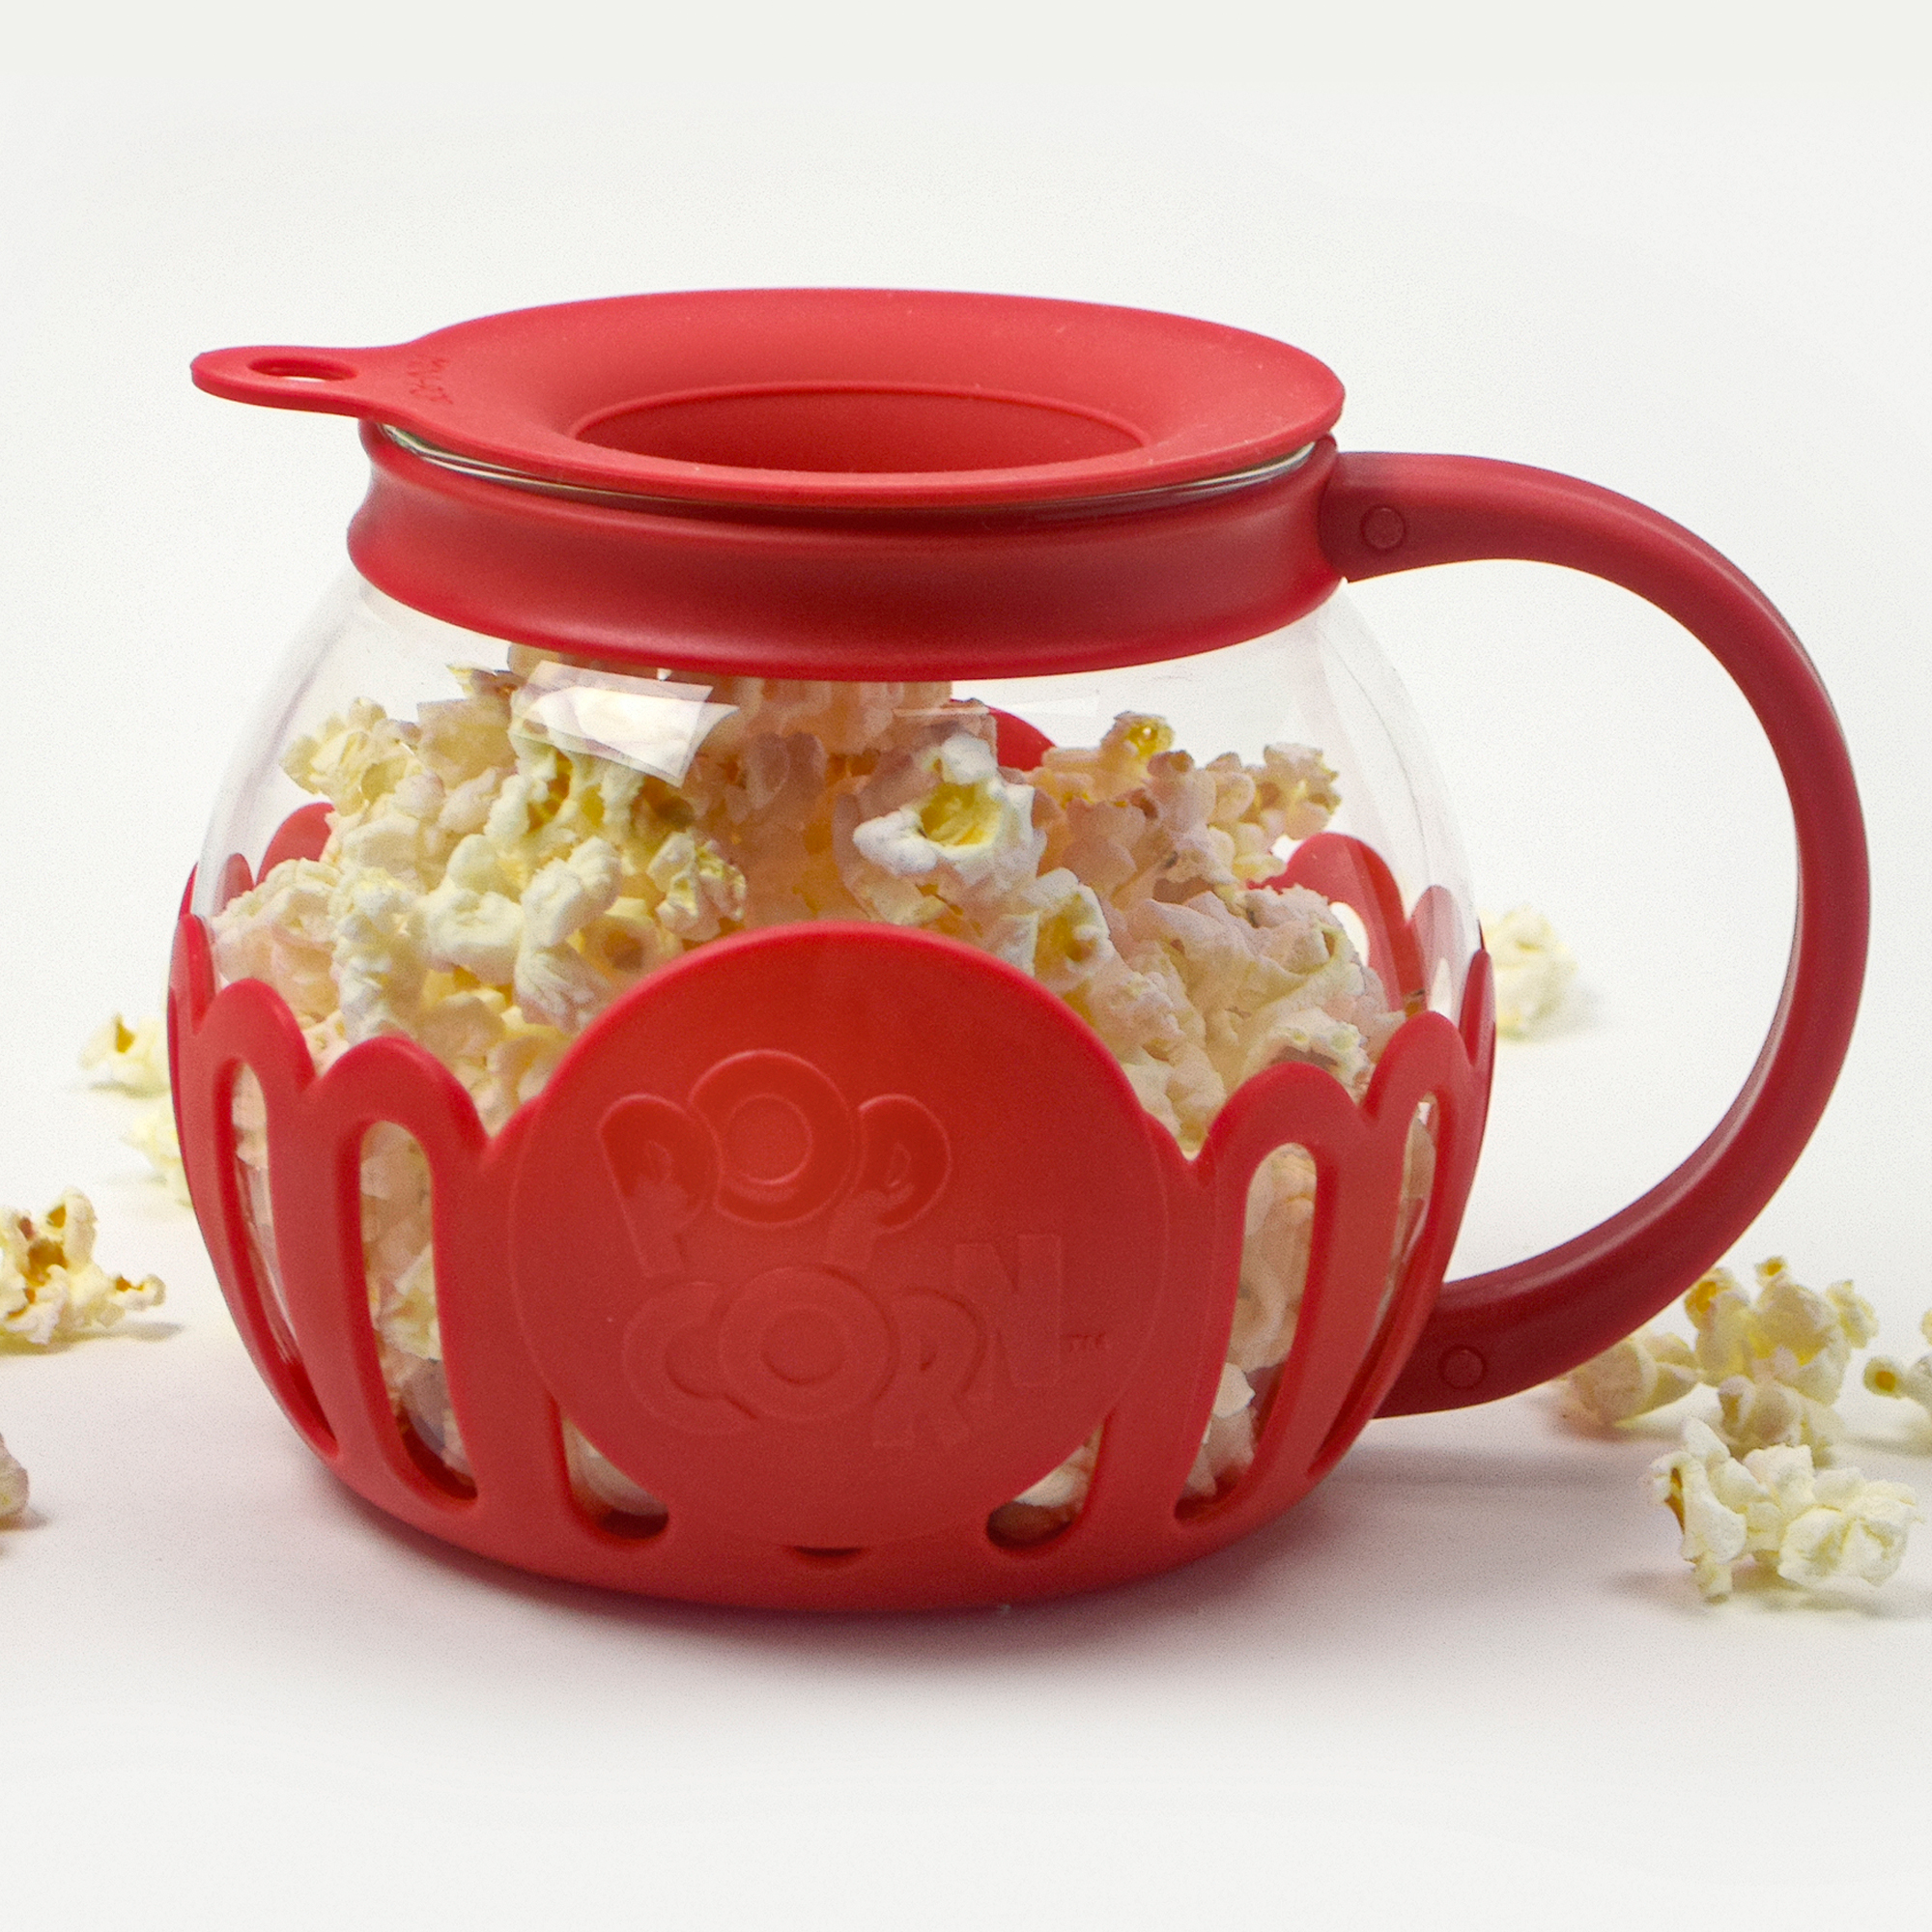 Micro-Pop Popcorn Popper, With 3-in-1 Lid - Ecolution - 3 Quart Family Size  / Teal